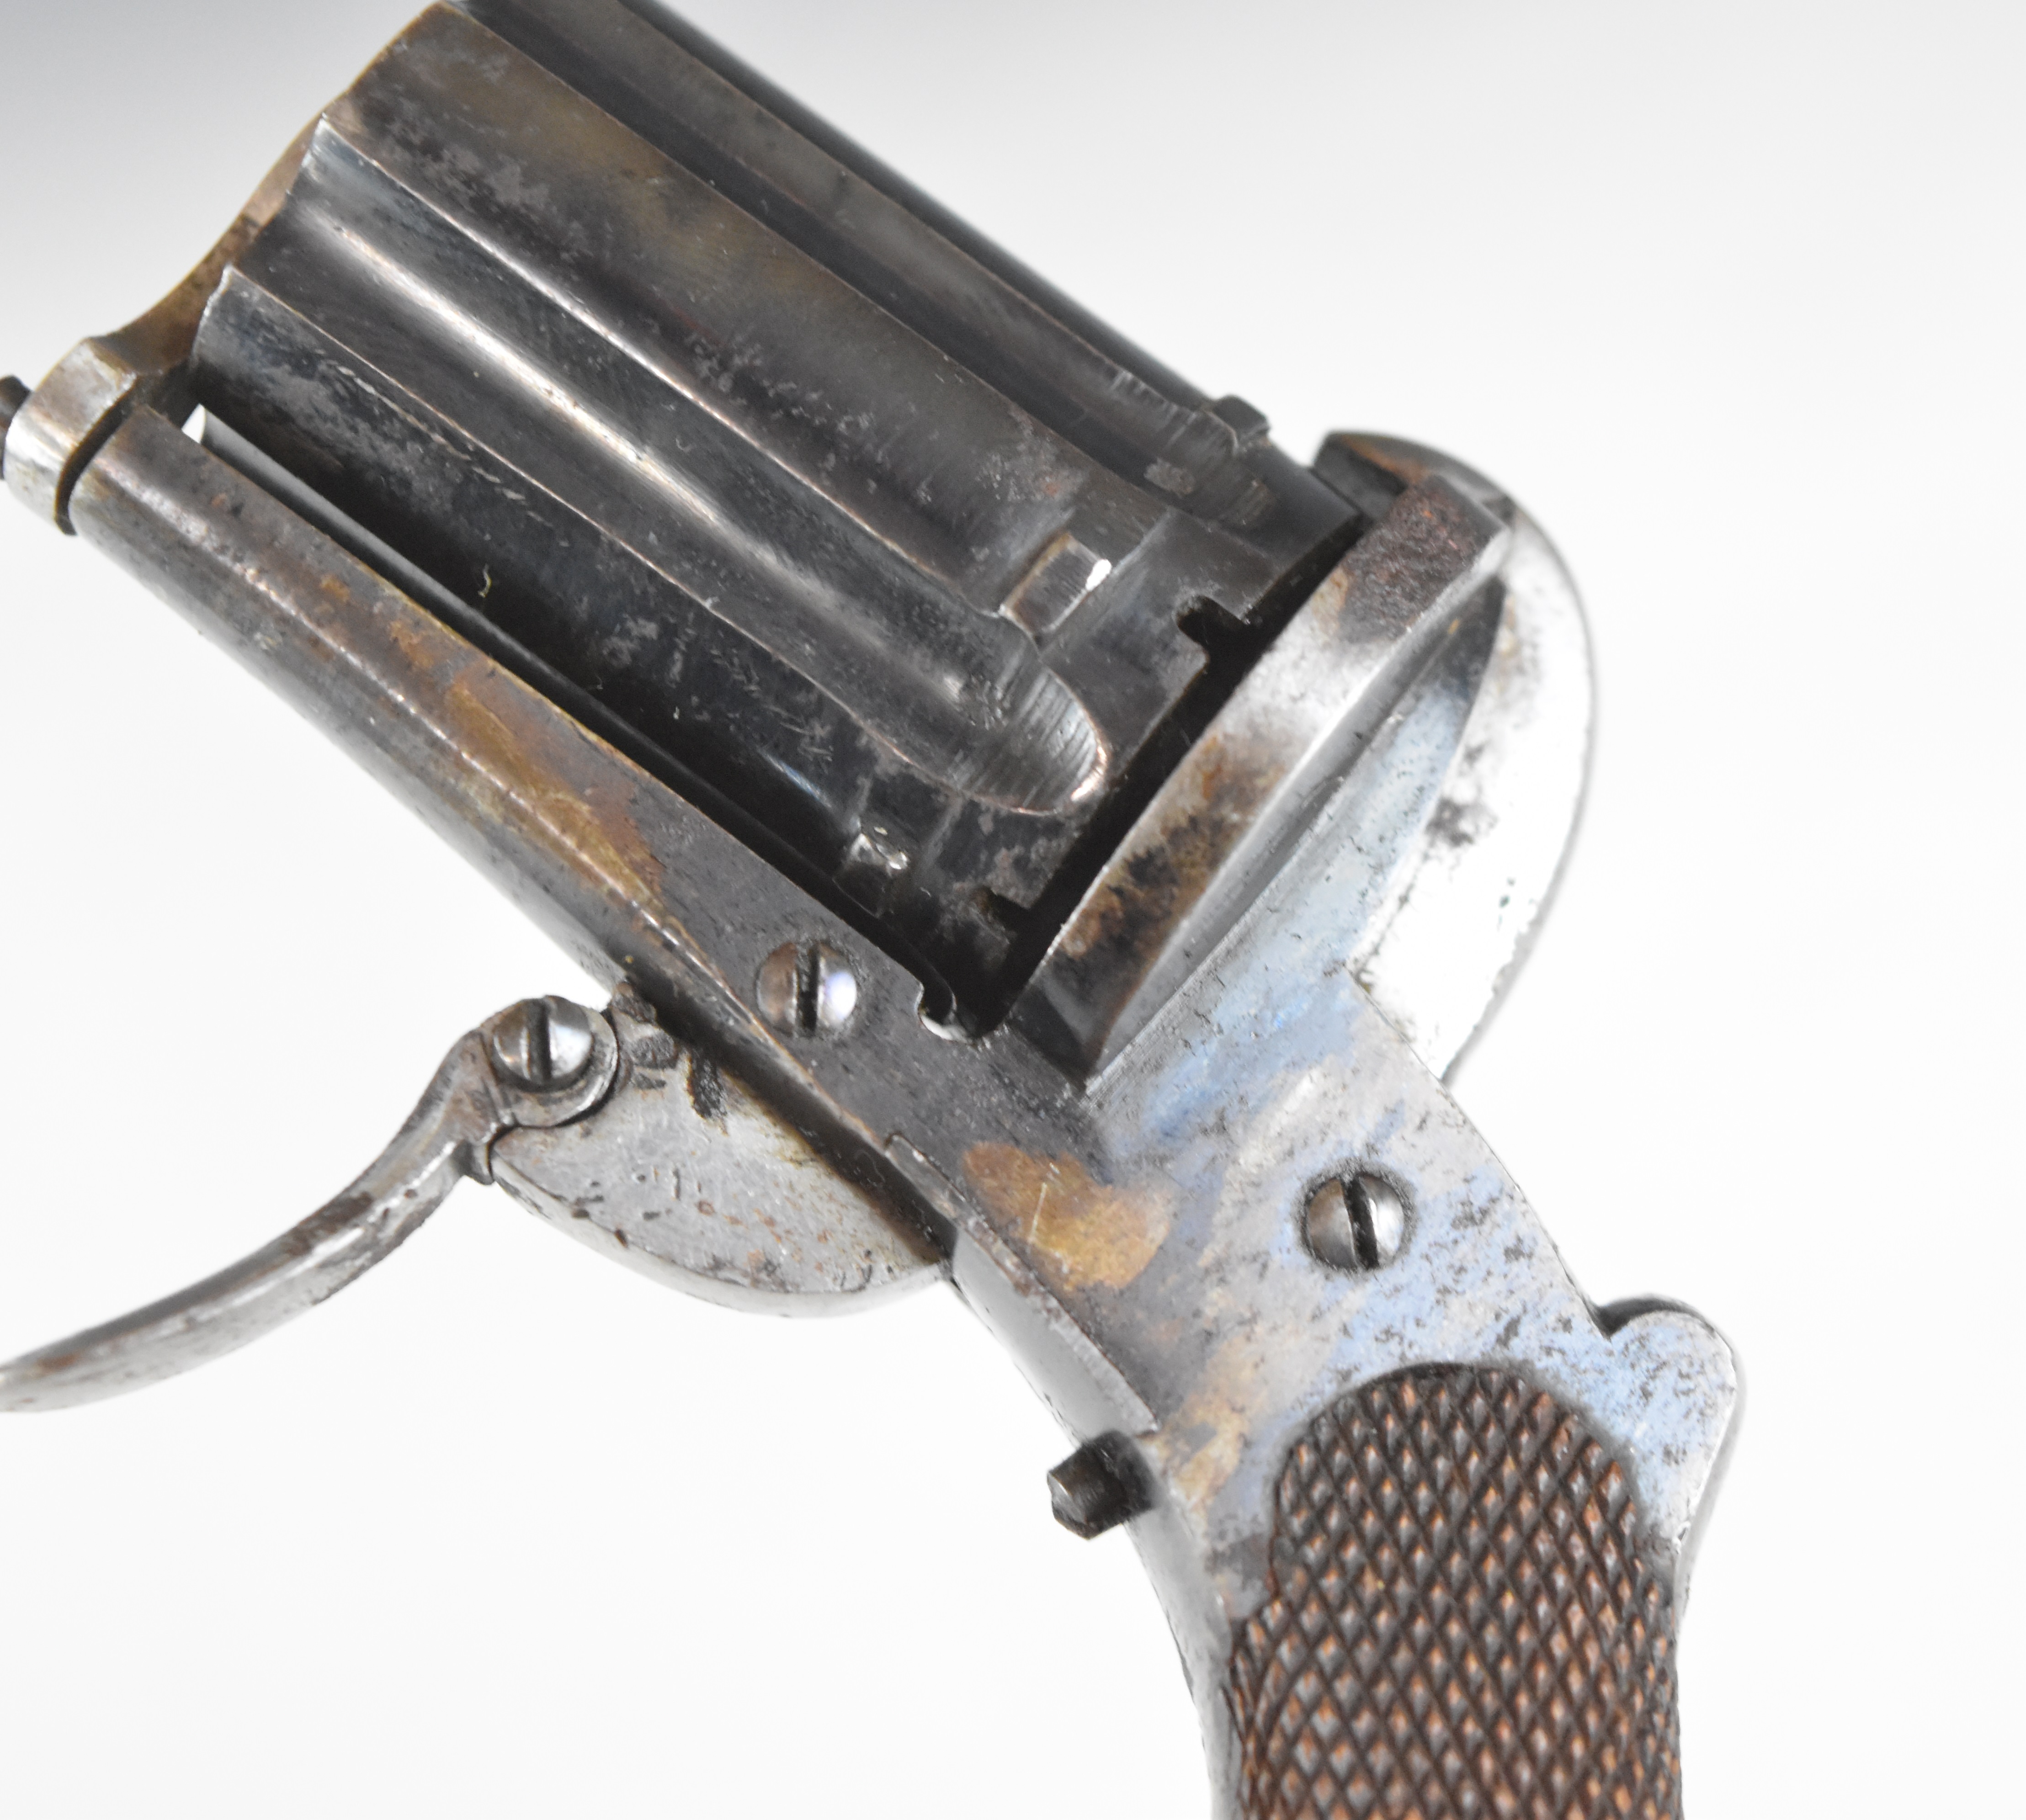 Unnamed 5mm six-shot pinfire hammer action pepperbox pistol/ revolver with chequered wooden grips, - Image 8 of 8